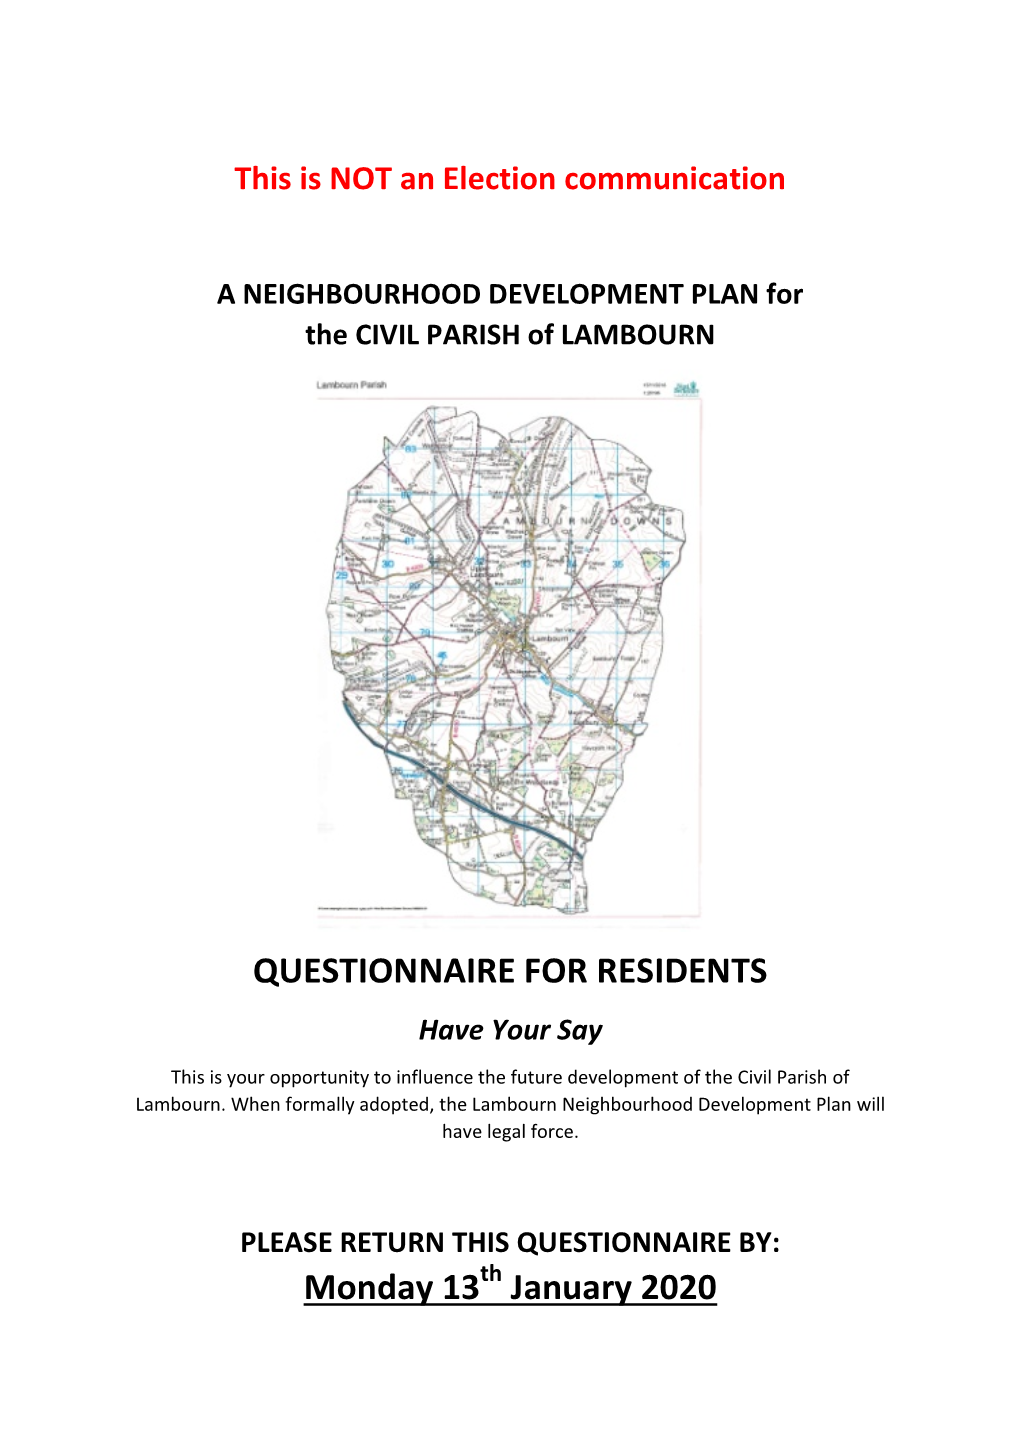 Questionnaire for Residents